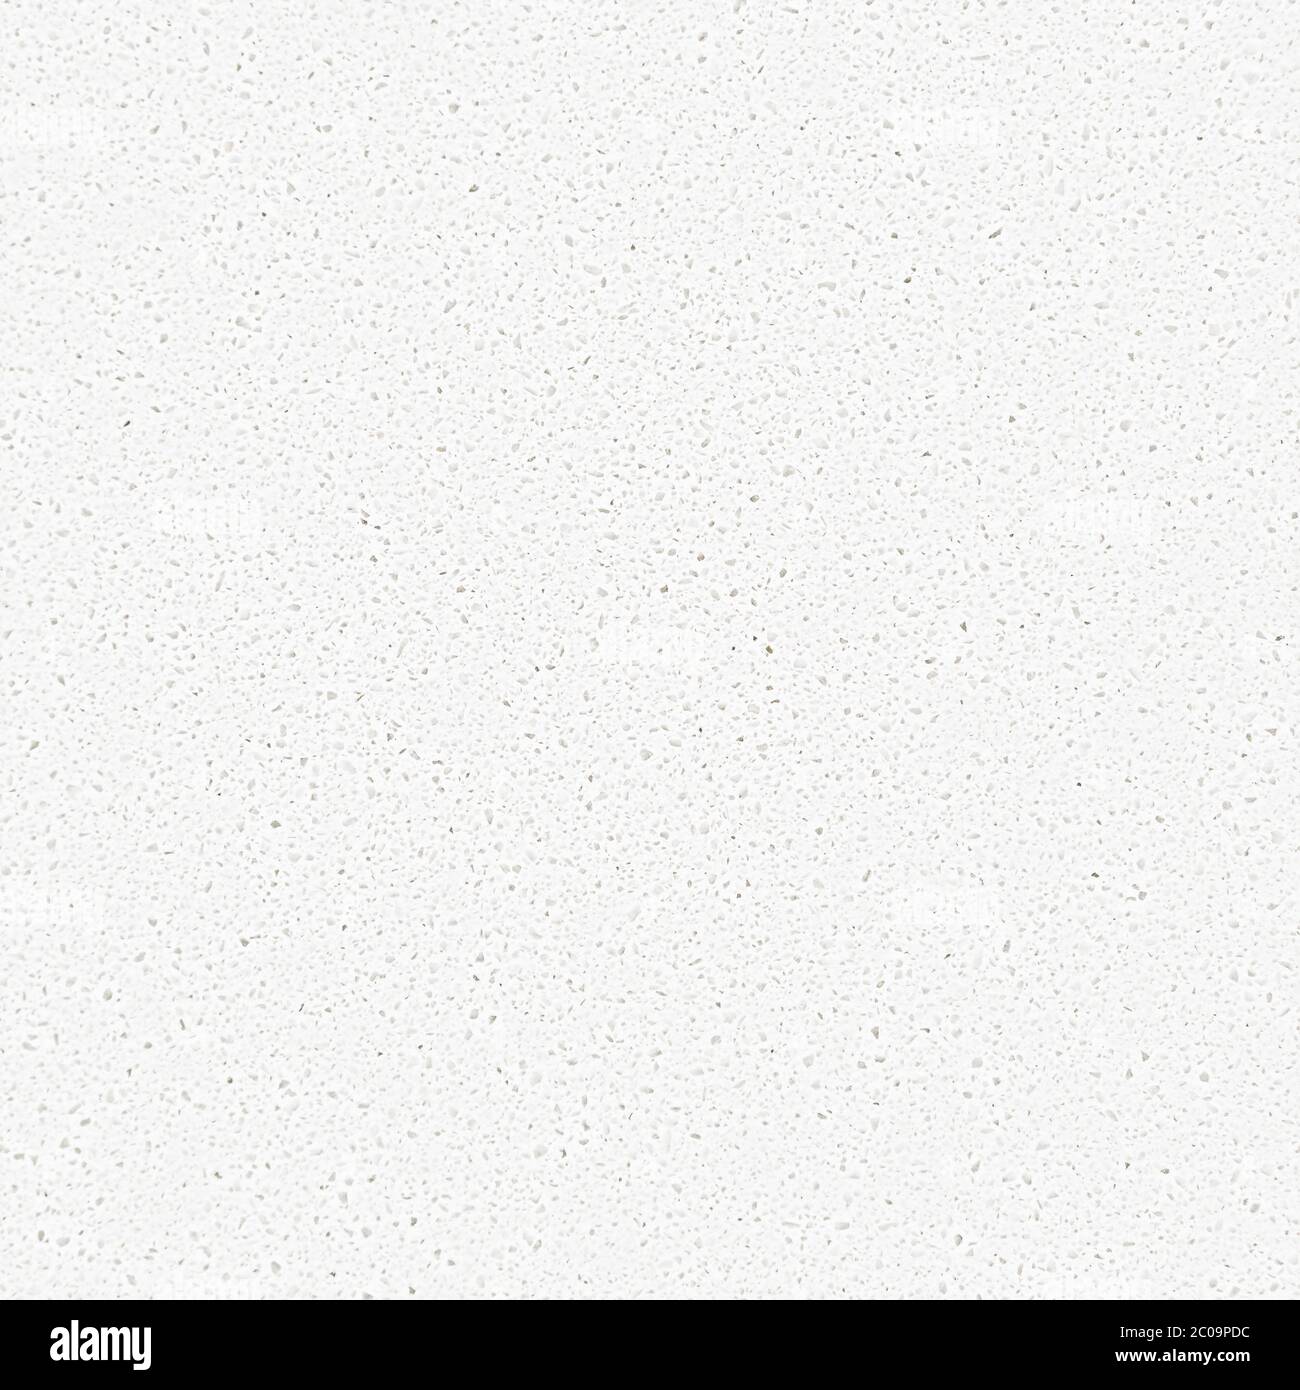 https://c8.alamy.com/comp/2C09PDC/seamless-white-quartz-texture-pattern-the-subtle-texture-is-tileable-best-for-repeating-countertop-background-surface-quartz-is-an-engineered-stone-2C09PDC.jpg